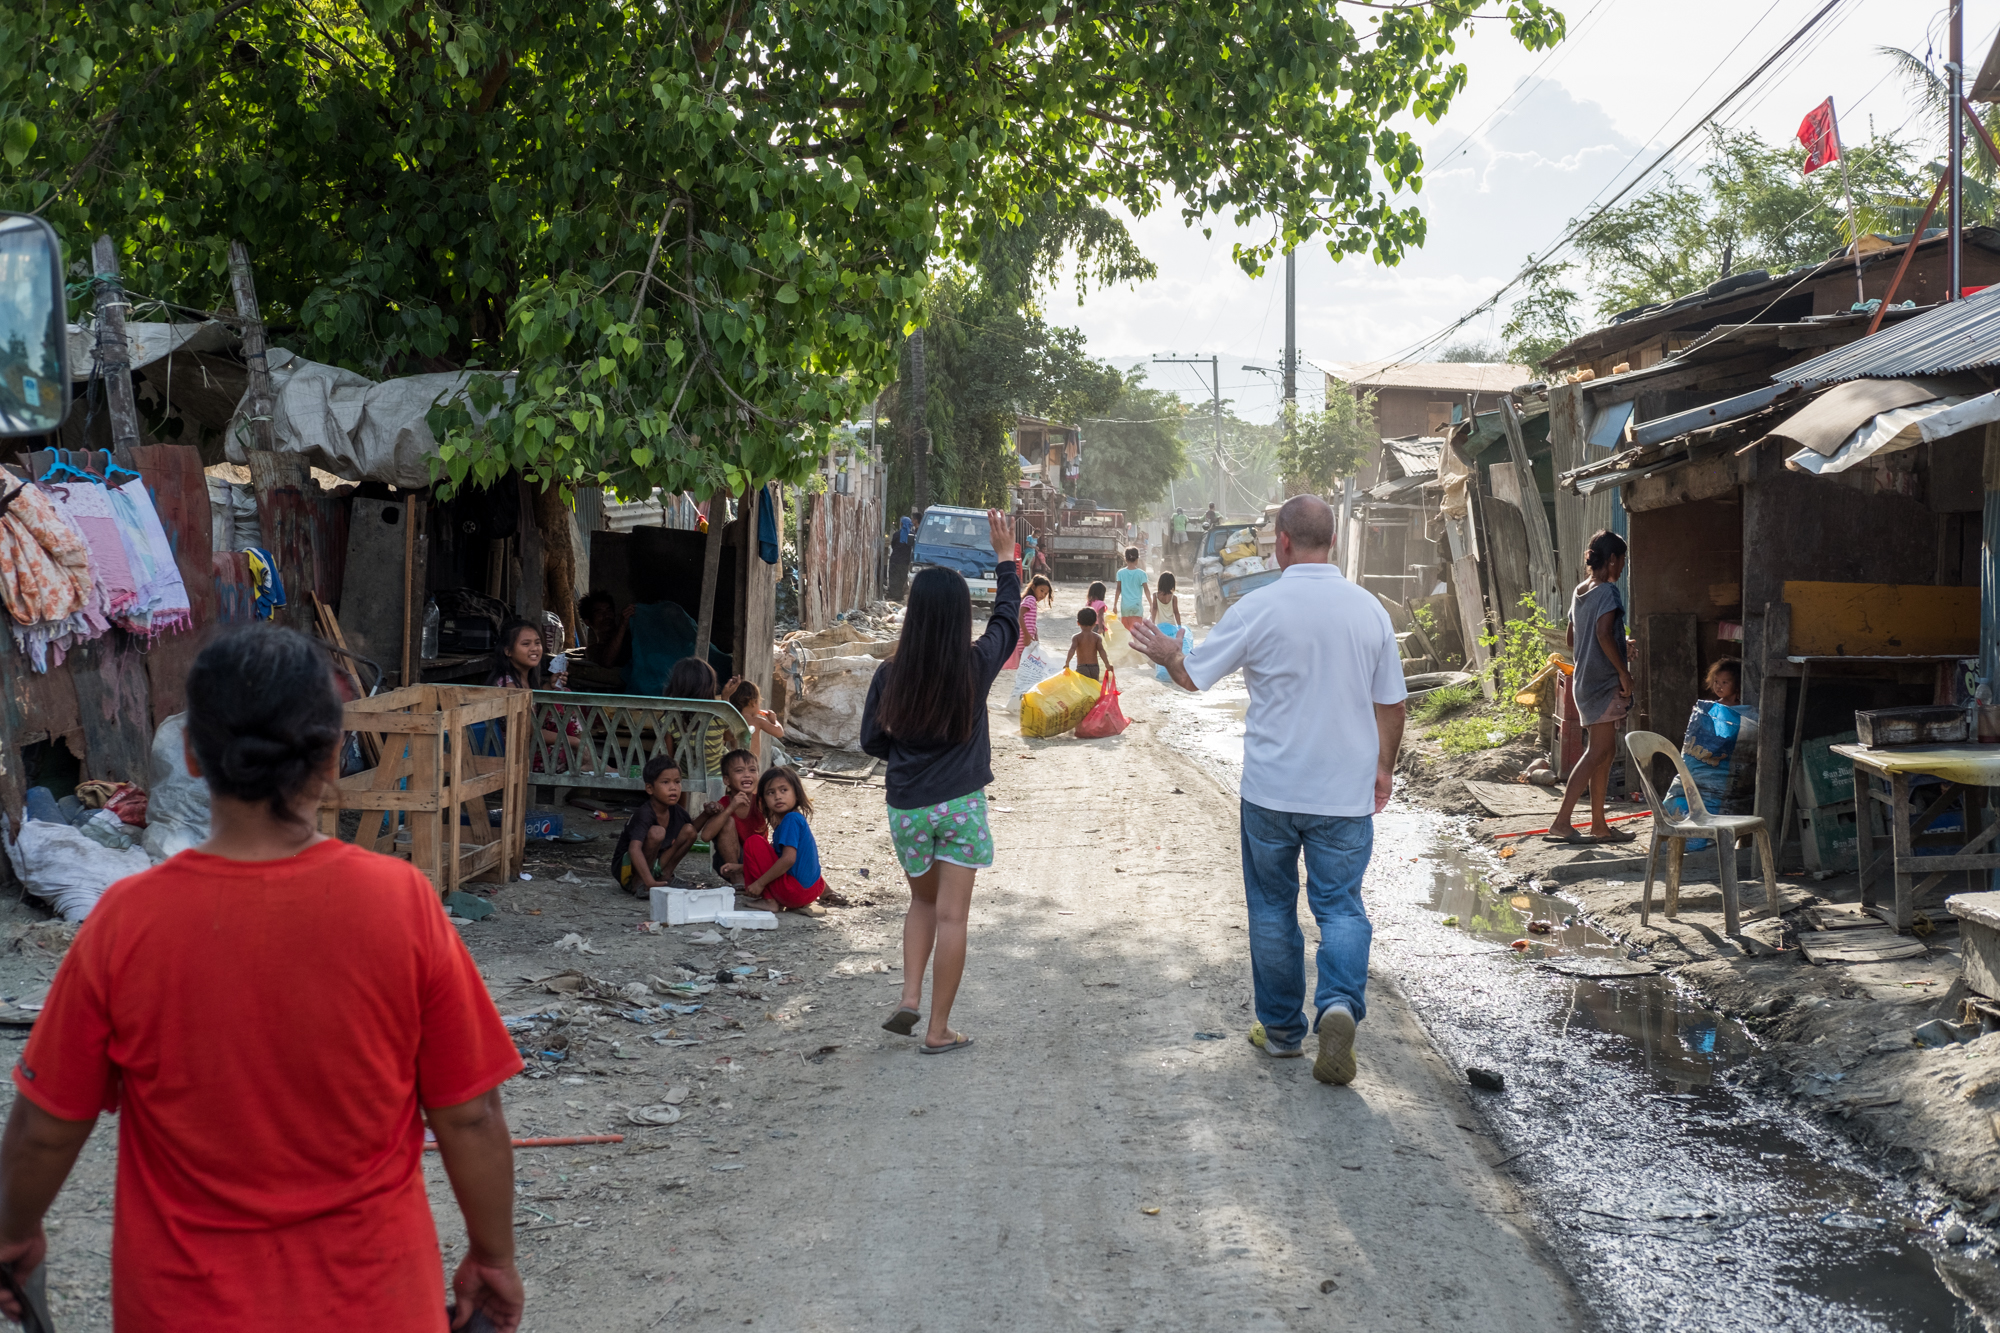  Frank Becker (right) walks with Marie Perly Anciano (left) on a road near the Mandaue Dump Site in Cebu, Philippines. Frank visits the dumpsites daily, and Marie is one of the many children that Frank has helped by donating school supplies and offer